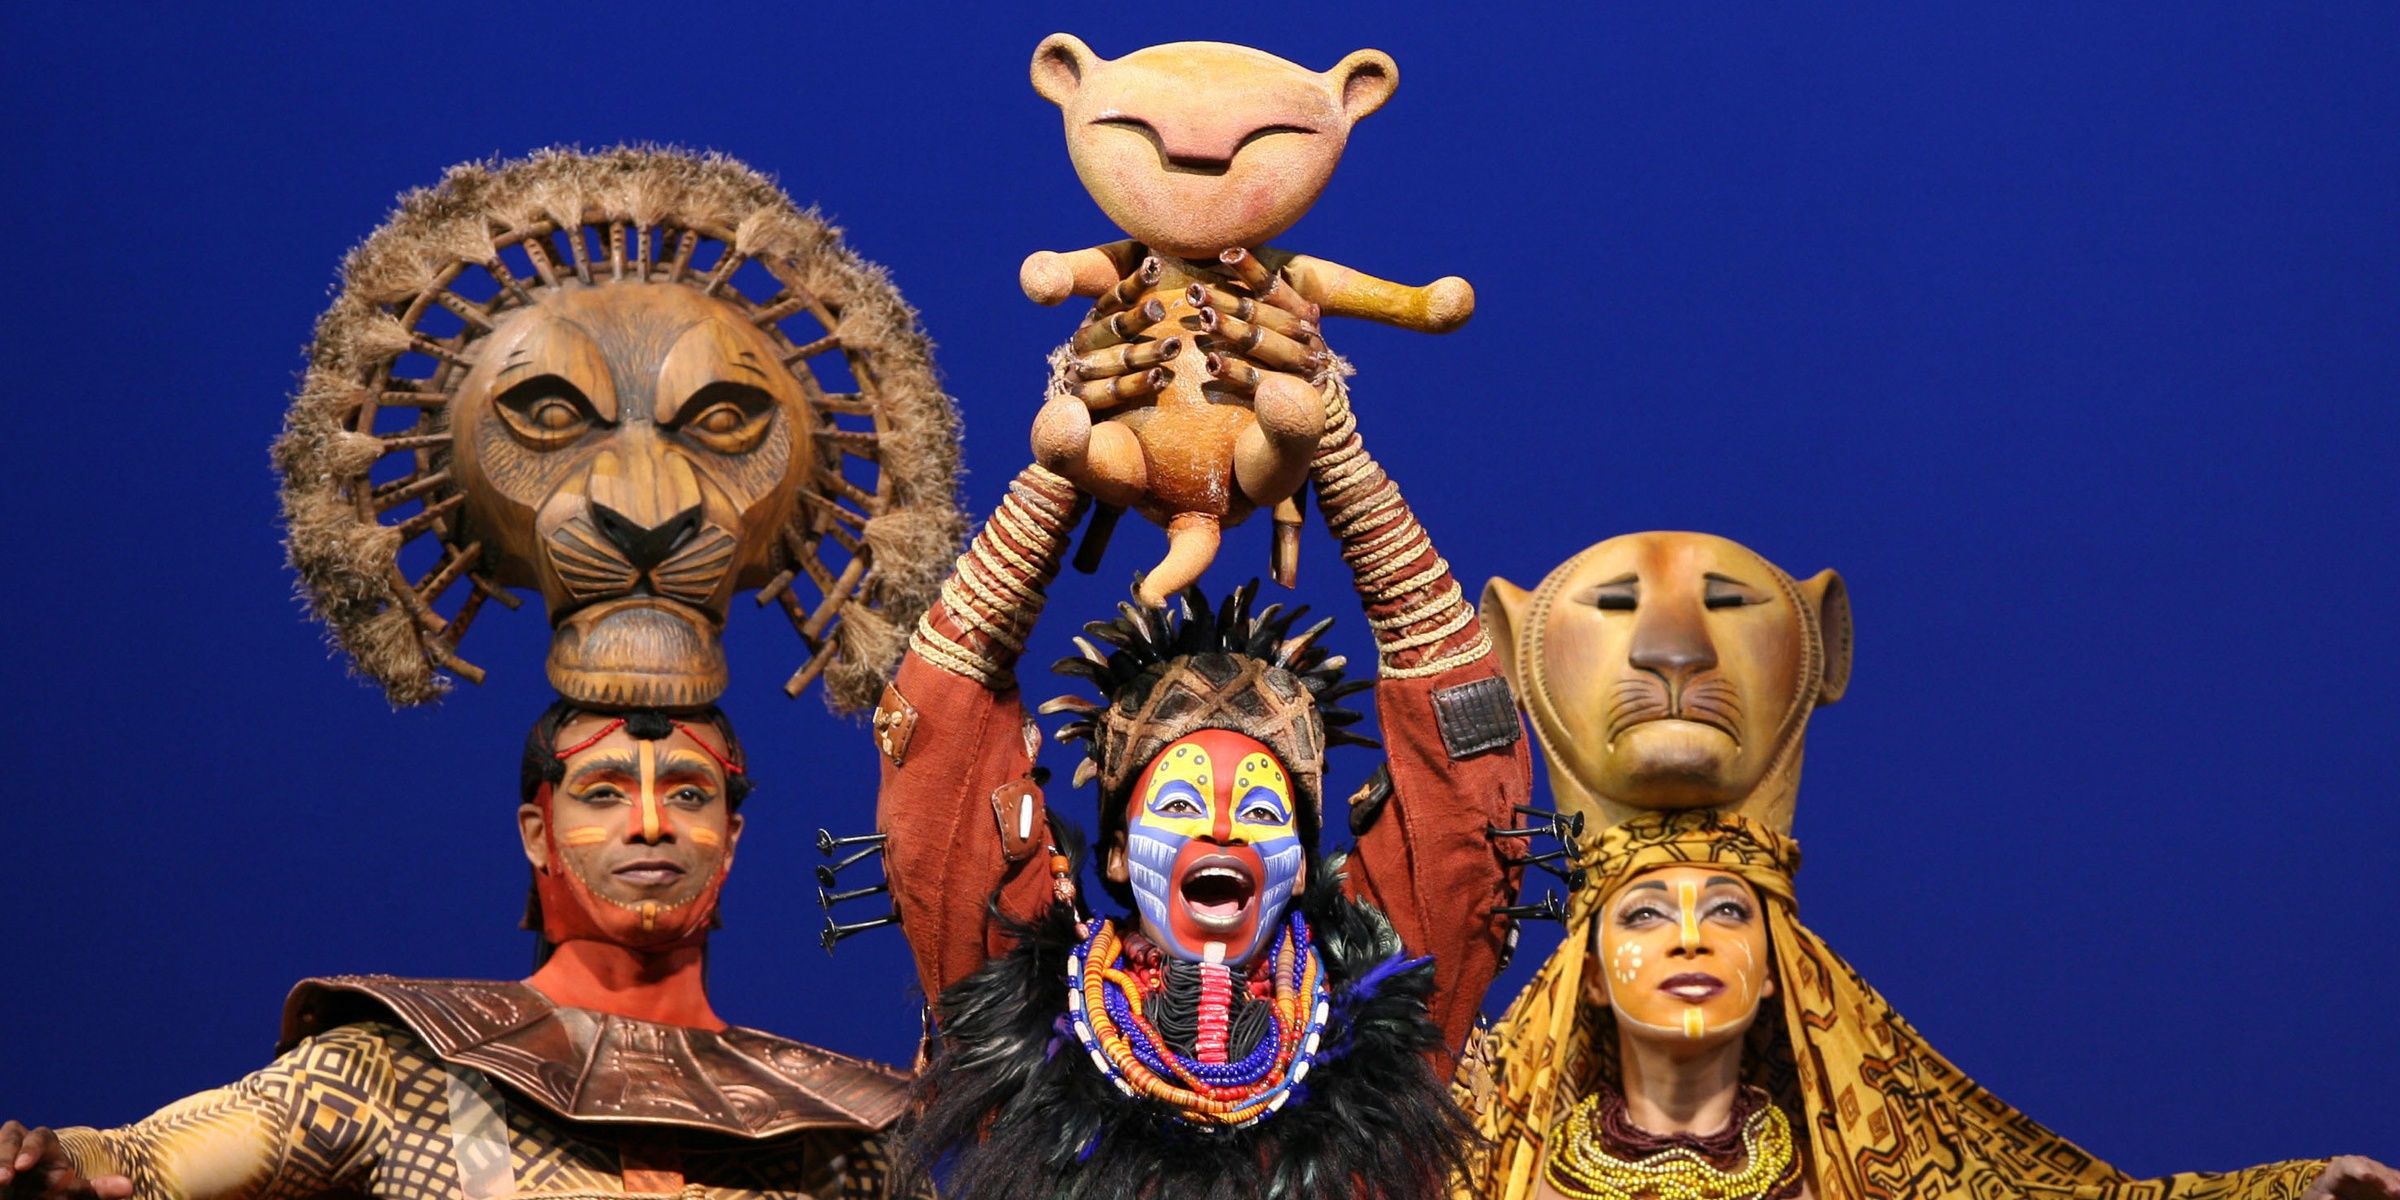 The Lion King musical on stage featuring a baby simba